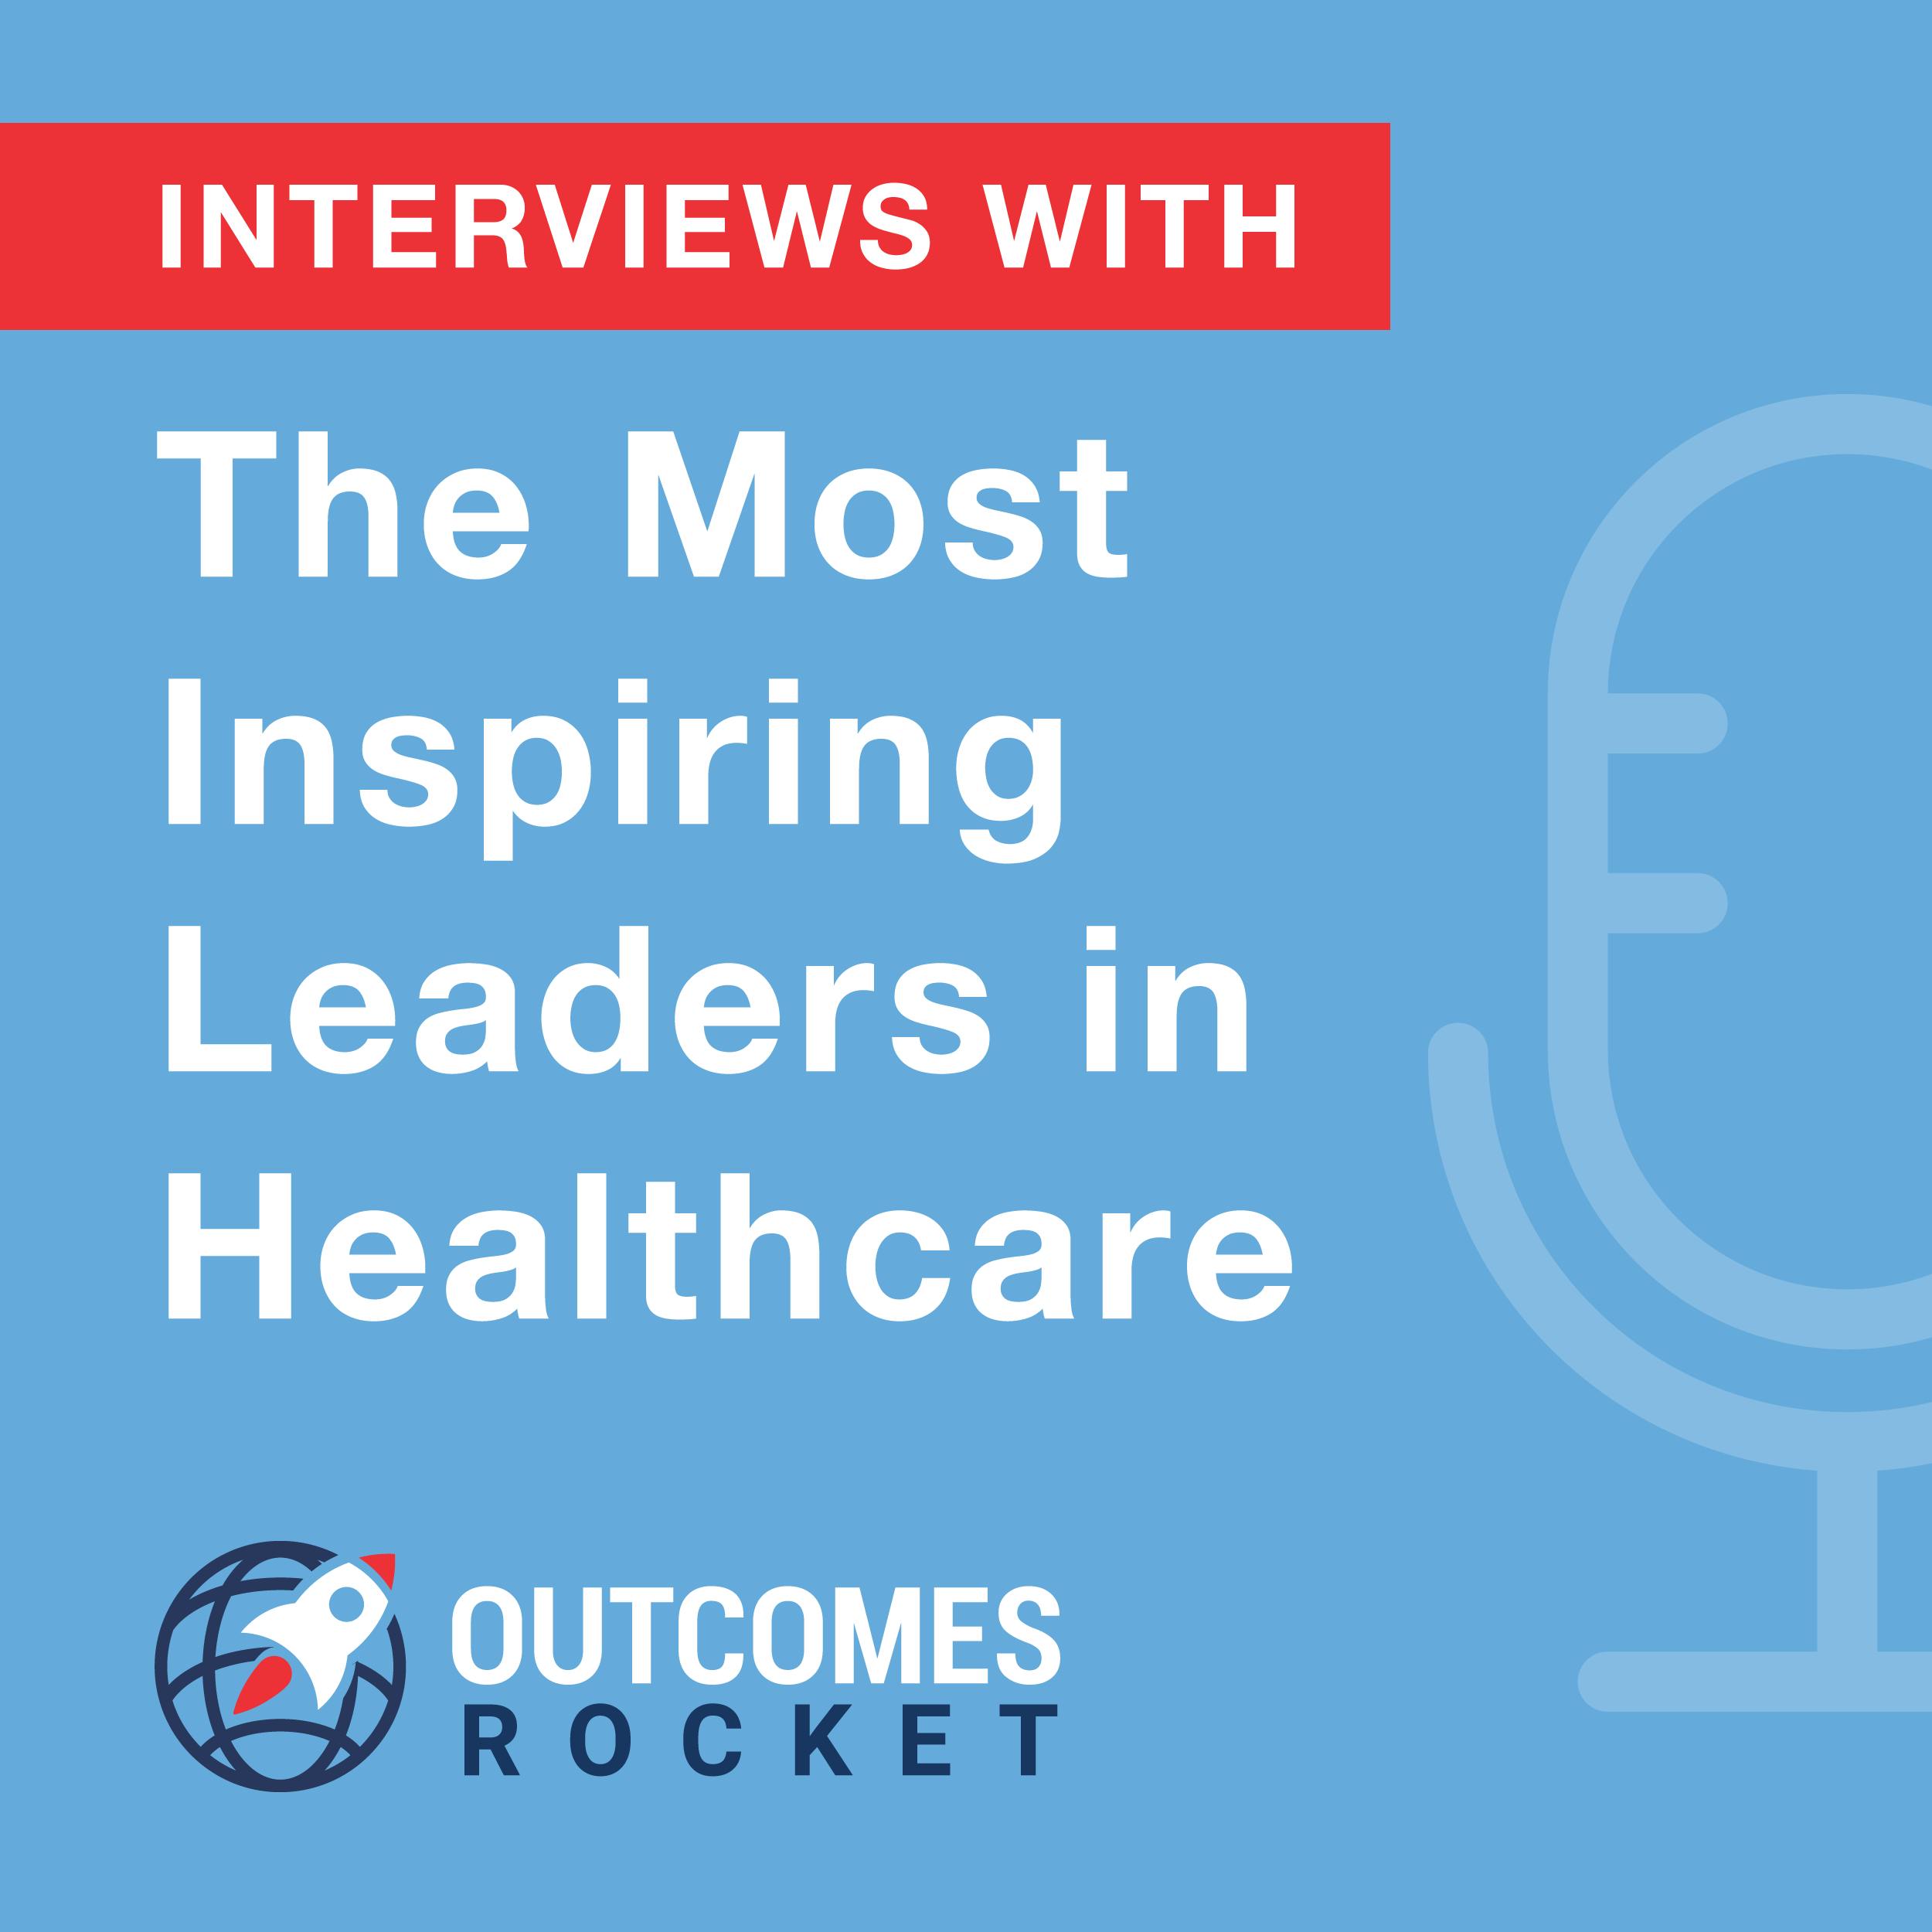 Insights for Healthcare Consumerism and Digital Marketing with Scott Alexander, President, iVelocity Marketing